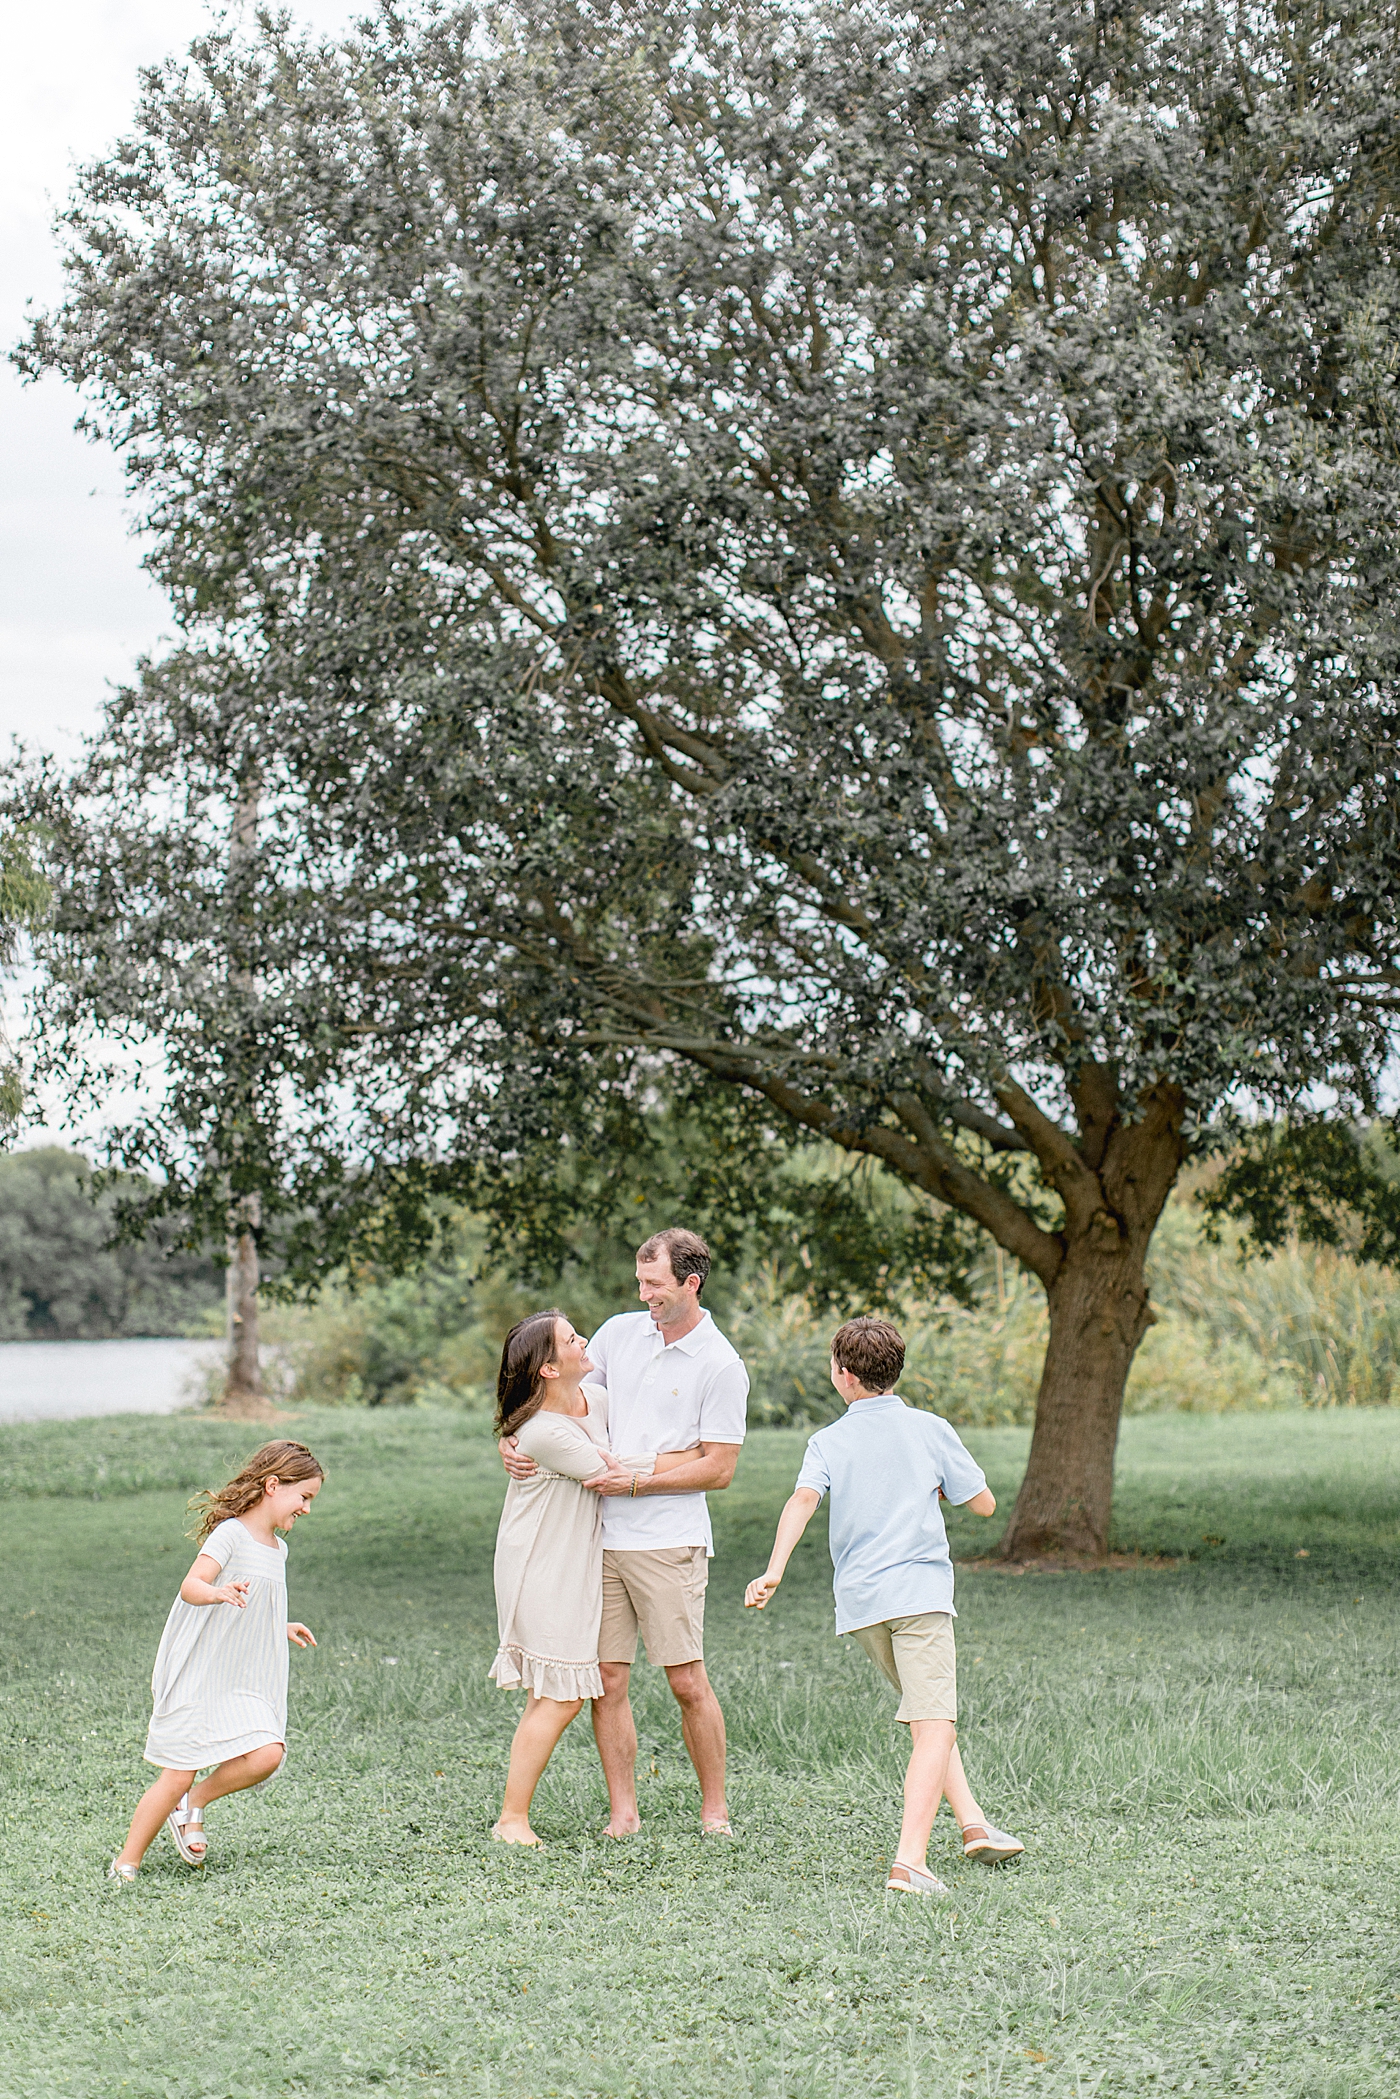 Two kids running around Mom and Dad during family photoshoot. Photo by Brittany Elise Photography.